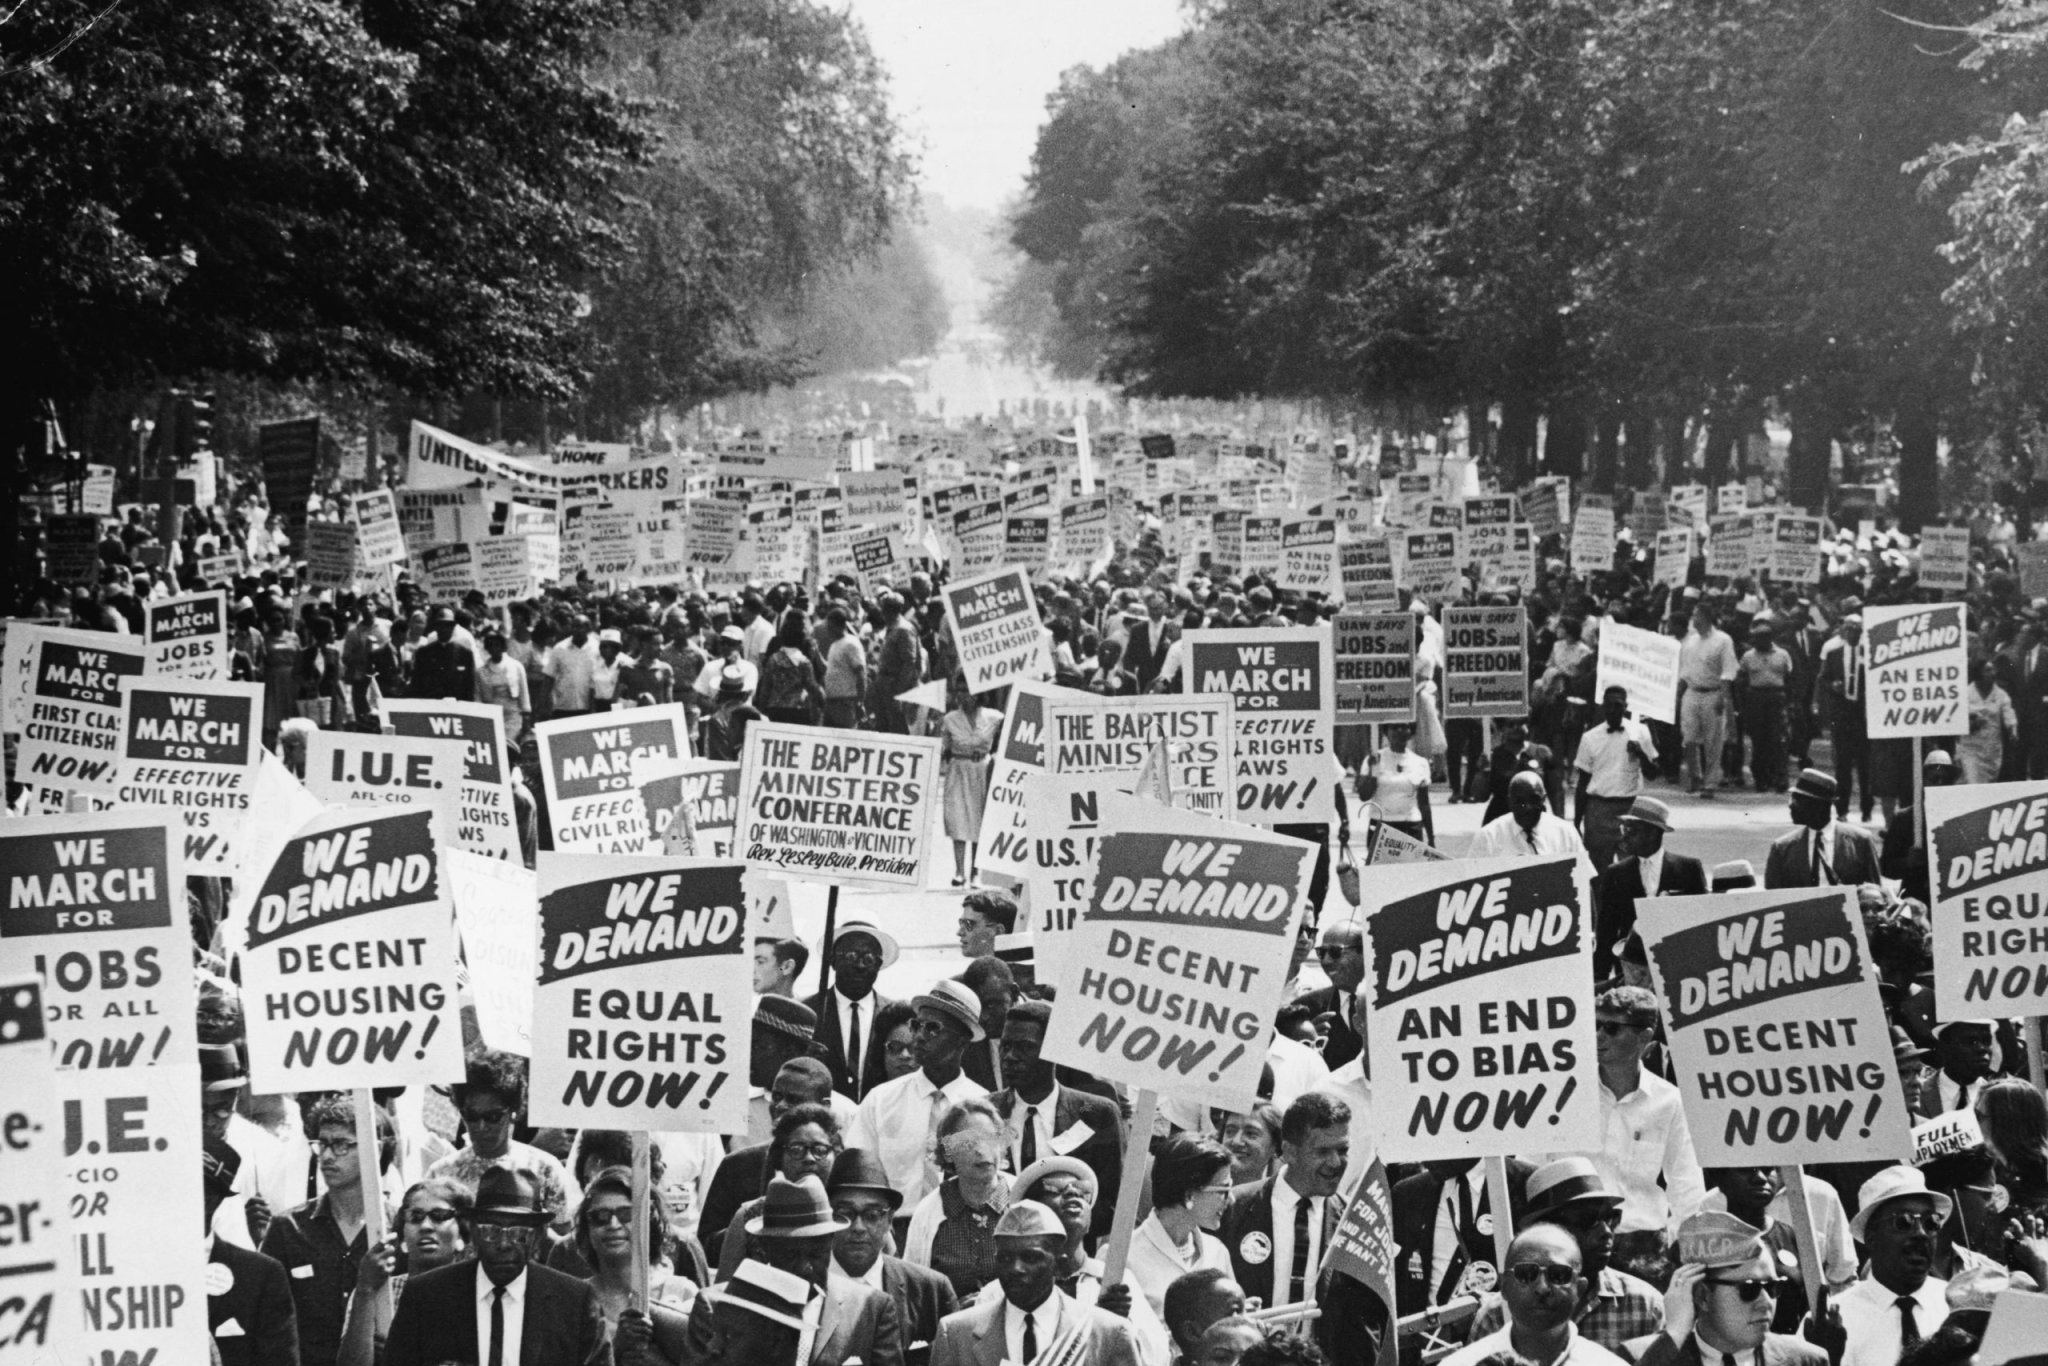 11 “Facts” About the Civil Rights Movement That Aren’t True